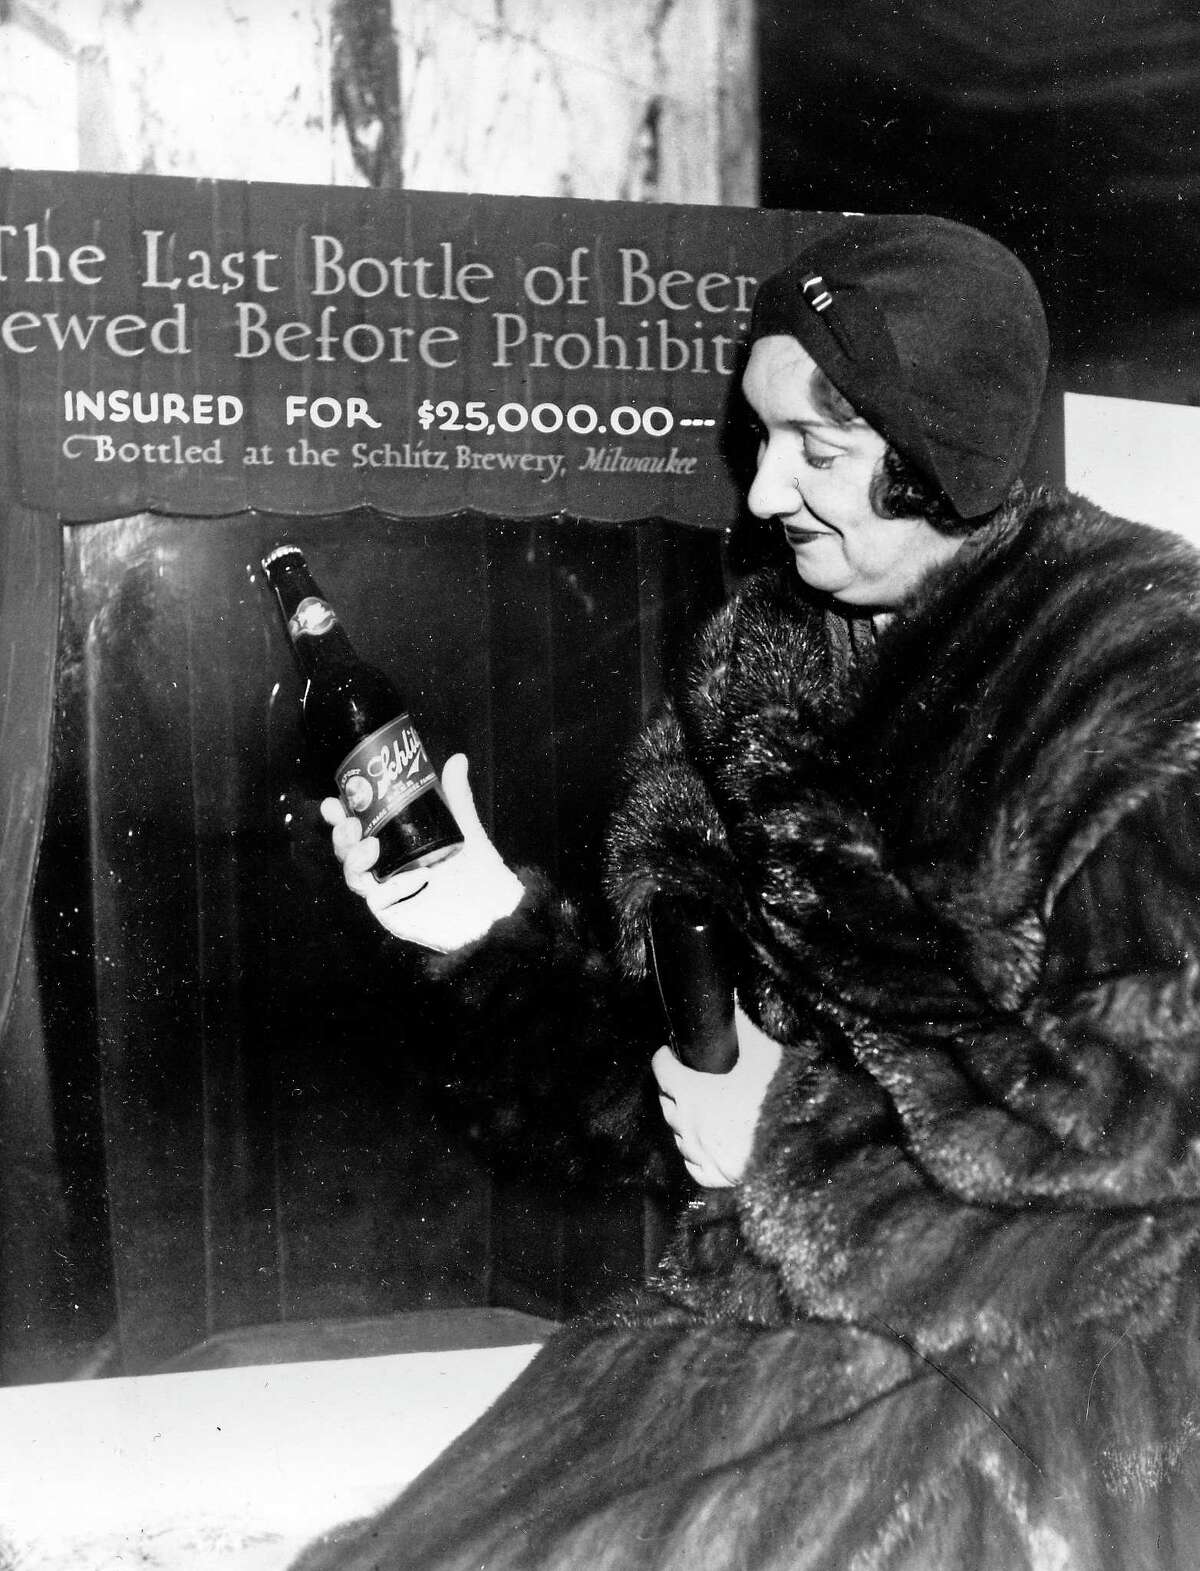 Rae Samuels holds the last bottle of beer that was distilled before prohibition went into effect in Chicago, Ill., Dec. 29, 1930. The bottle of Schlitz has been insured for $25,000. (AP Photo)